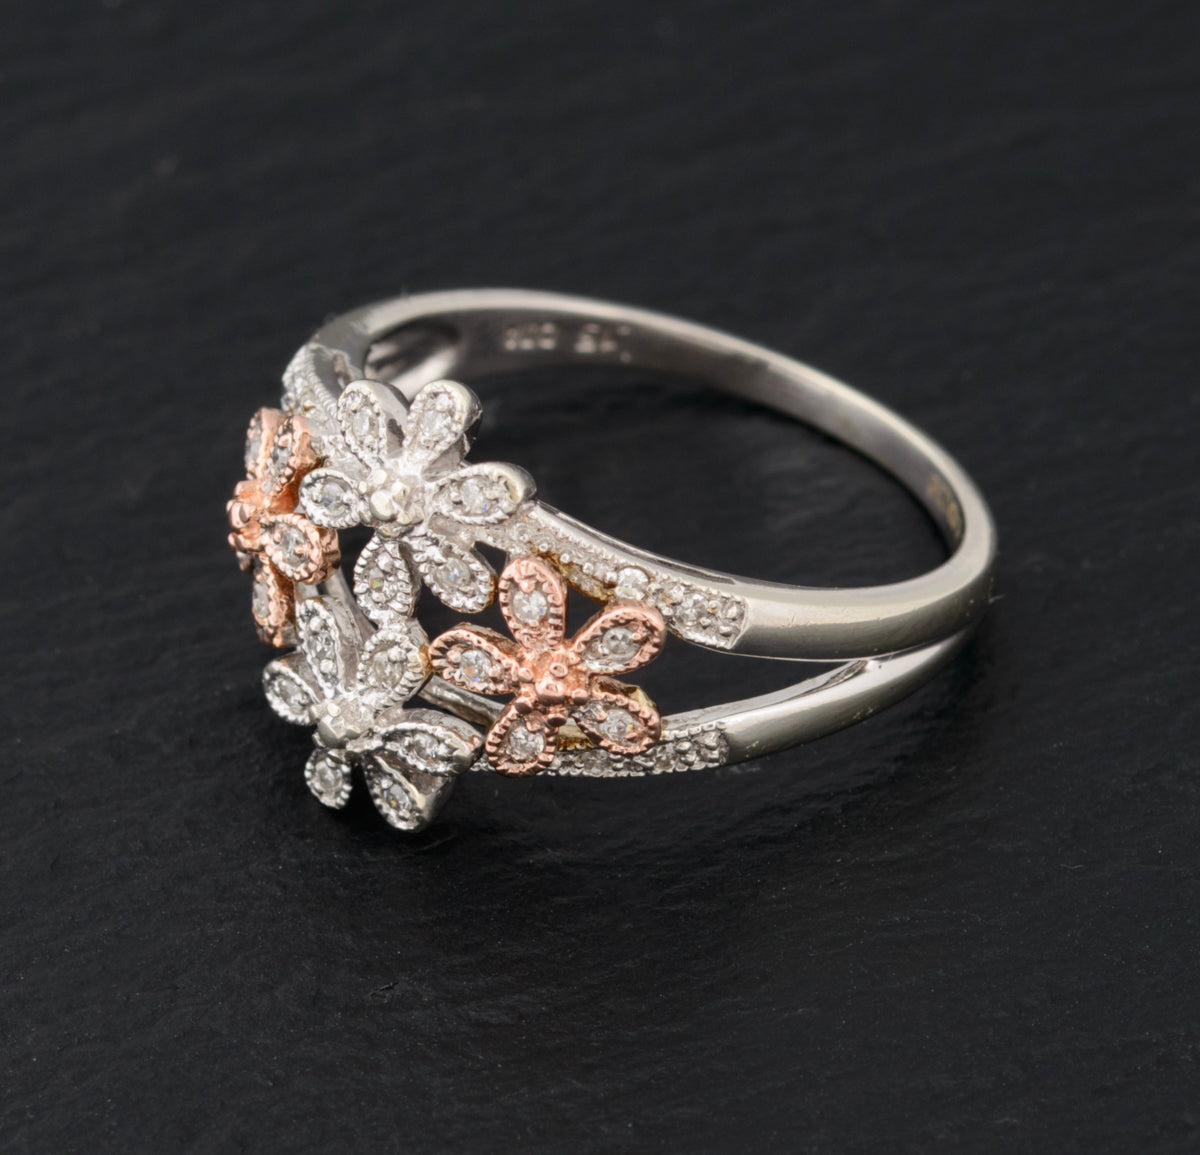 Feminine 9ct White & Rose Gold Flower Head Ring With Diamonds UK Size S (A1469)